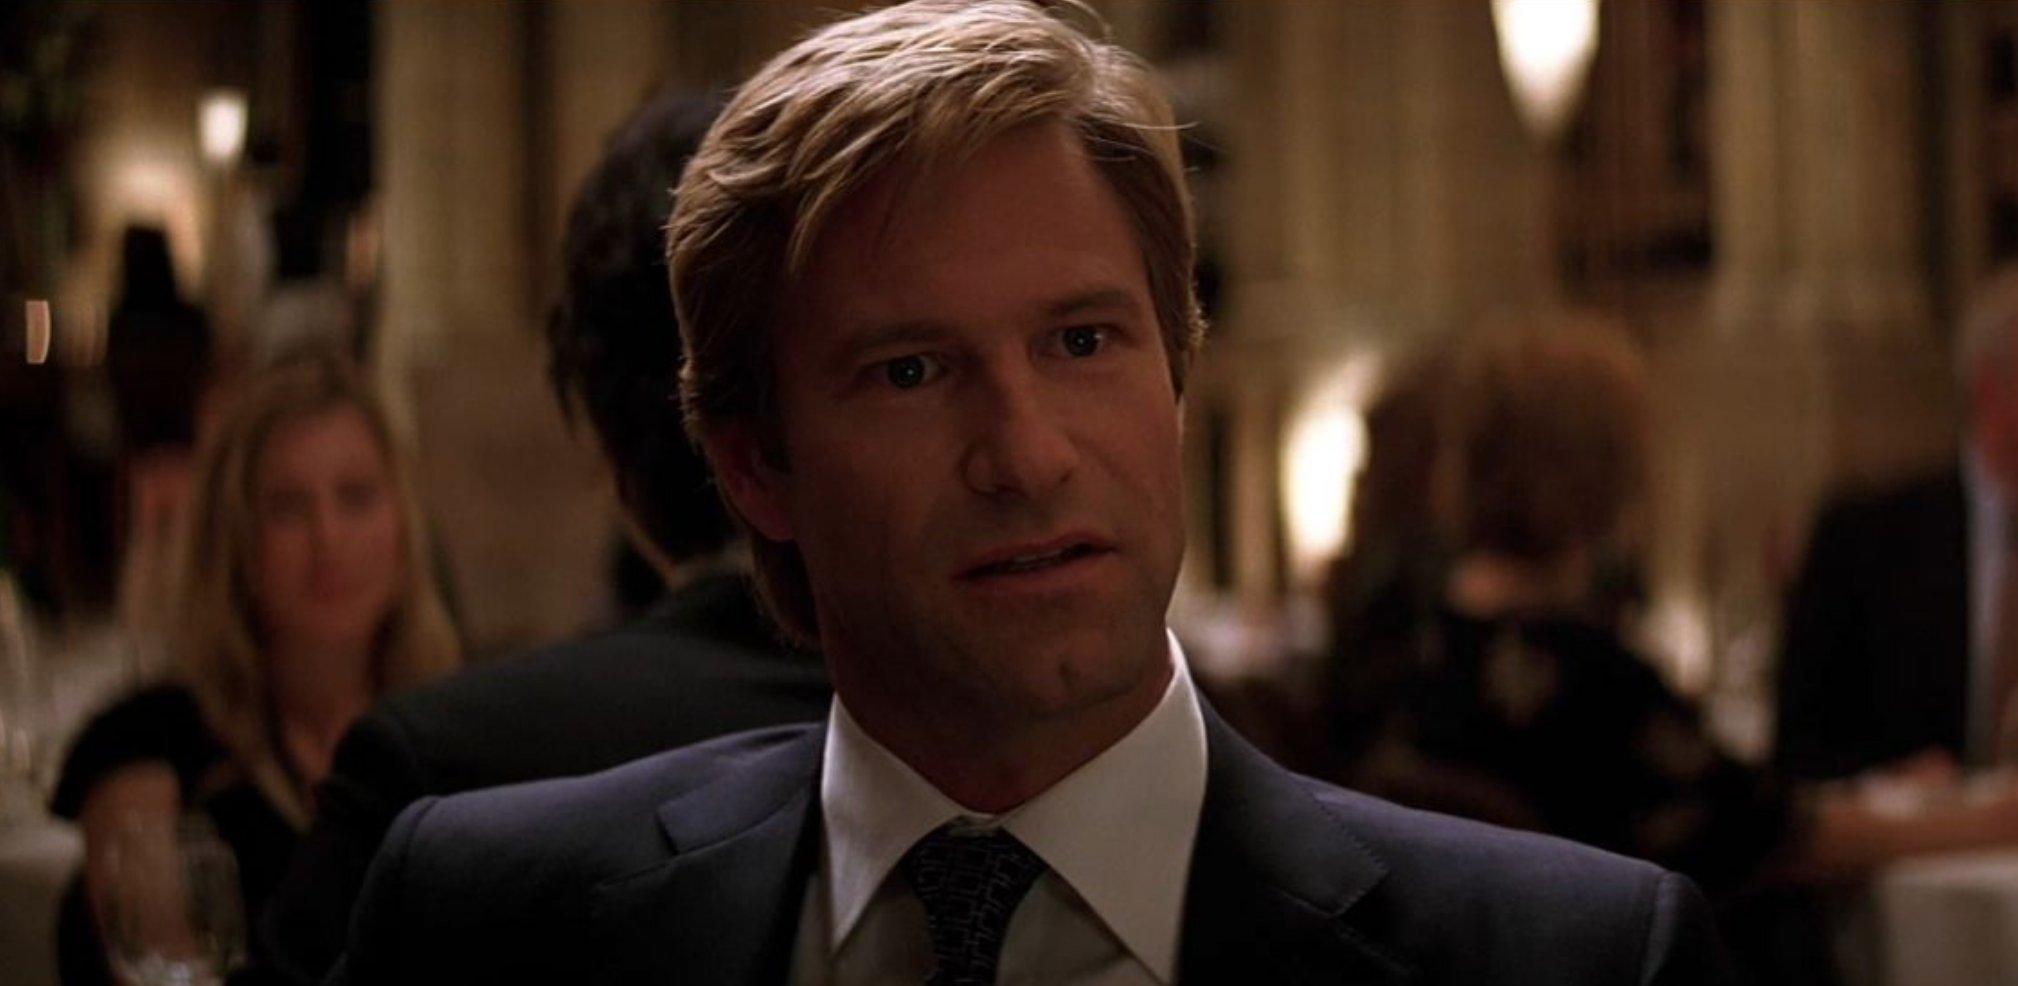 3. Which part of Harvey Dent's face got burned off in the explosion?